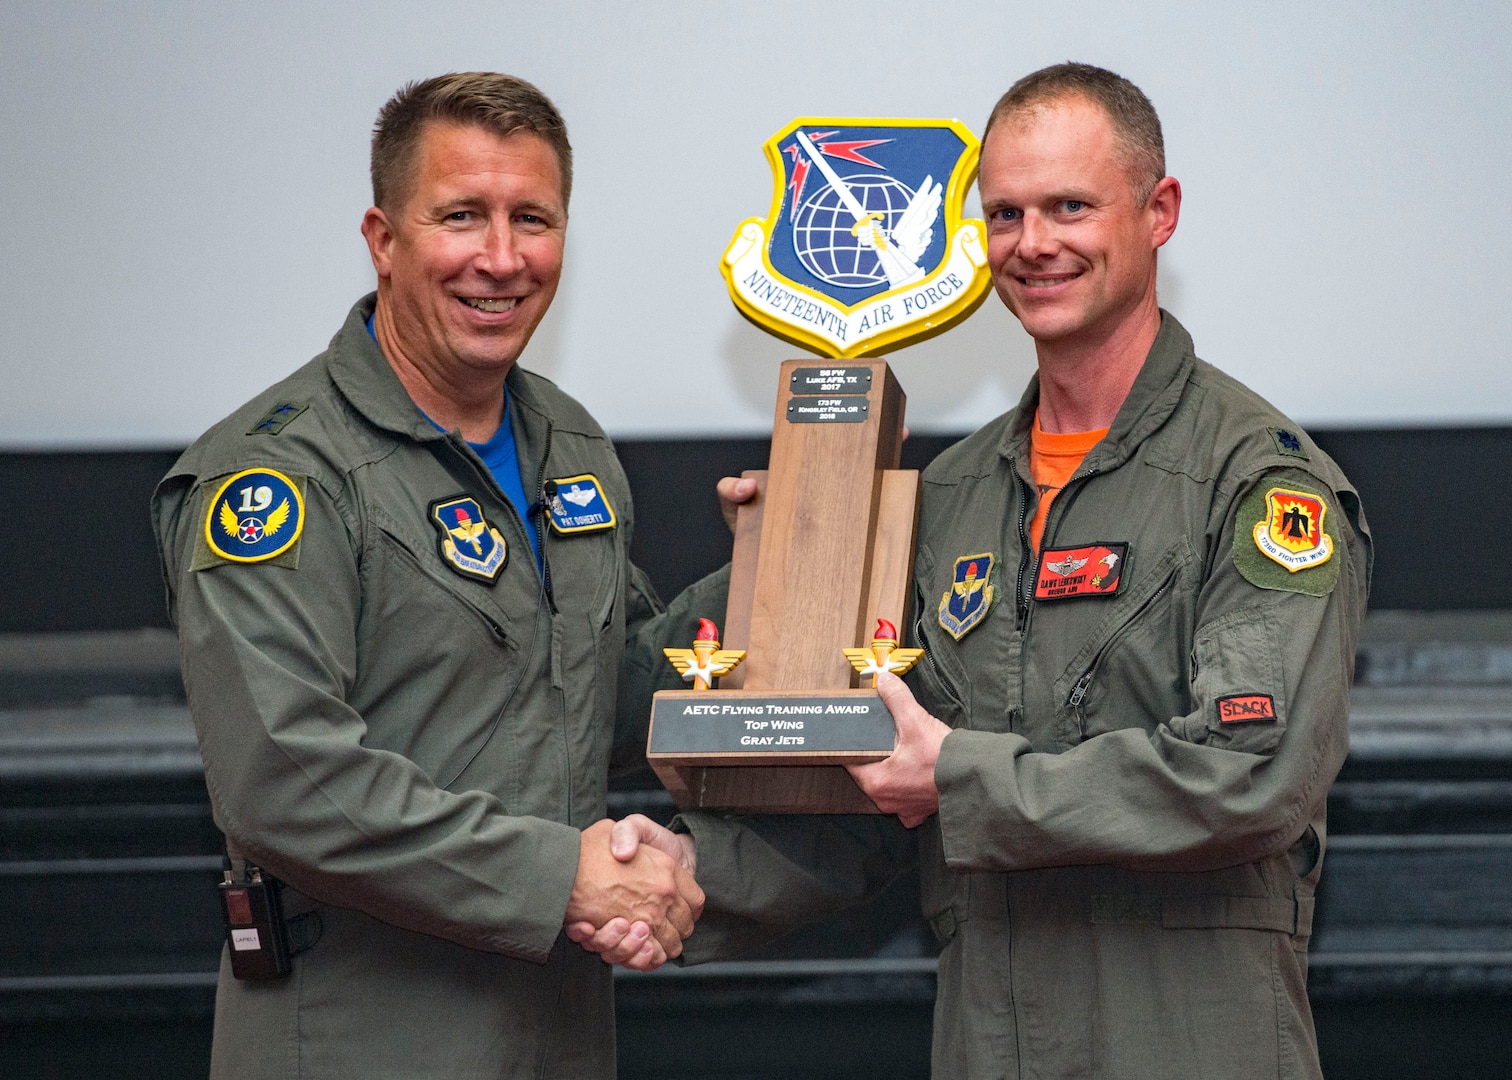 Maj. Gen. Patrick Doherty, 19th Air Force commander, presents the Top Wing-Gray Jet Division Award to the 173rd Fighter Wing commander, during the Air Education and Training Command Flying Training Awards Ceremony Oct. 26, 2018, at Joint Base San Antonio-Randolph, Texas. The award ceremony recognizes individuals, squadrons, groups and wings whose efforts have led to the highest levels of student production.